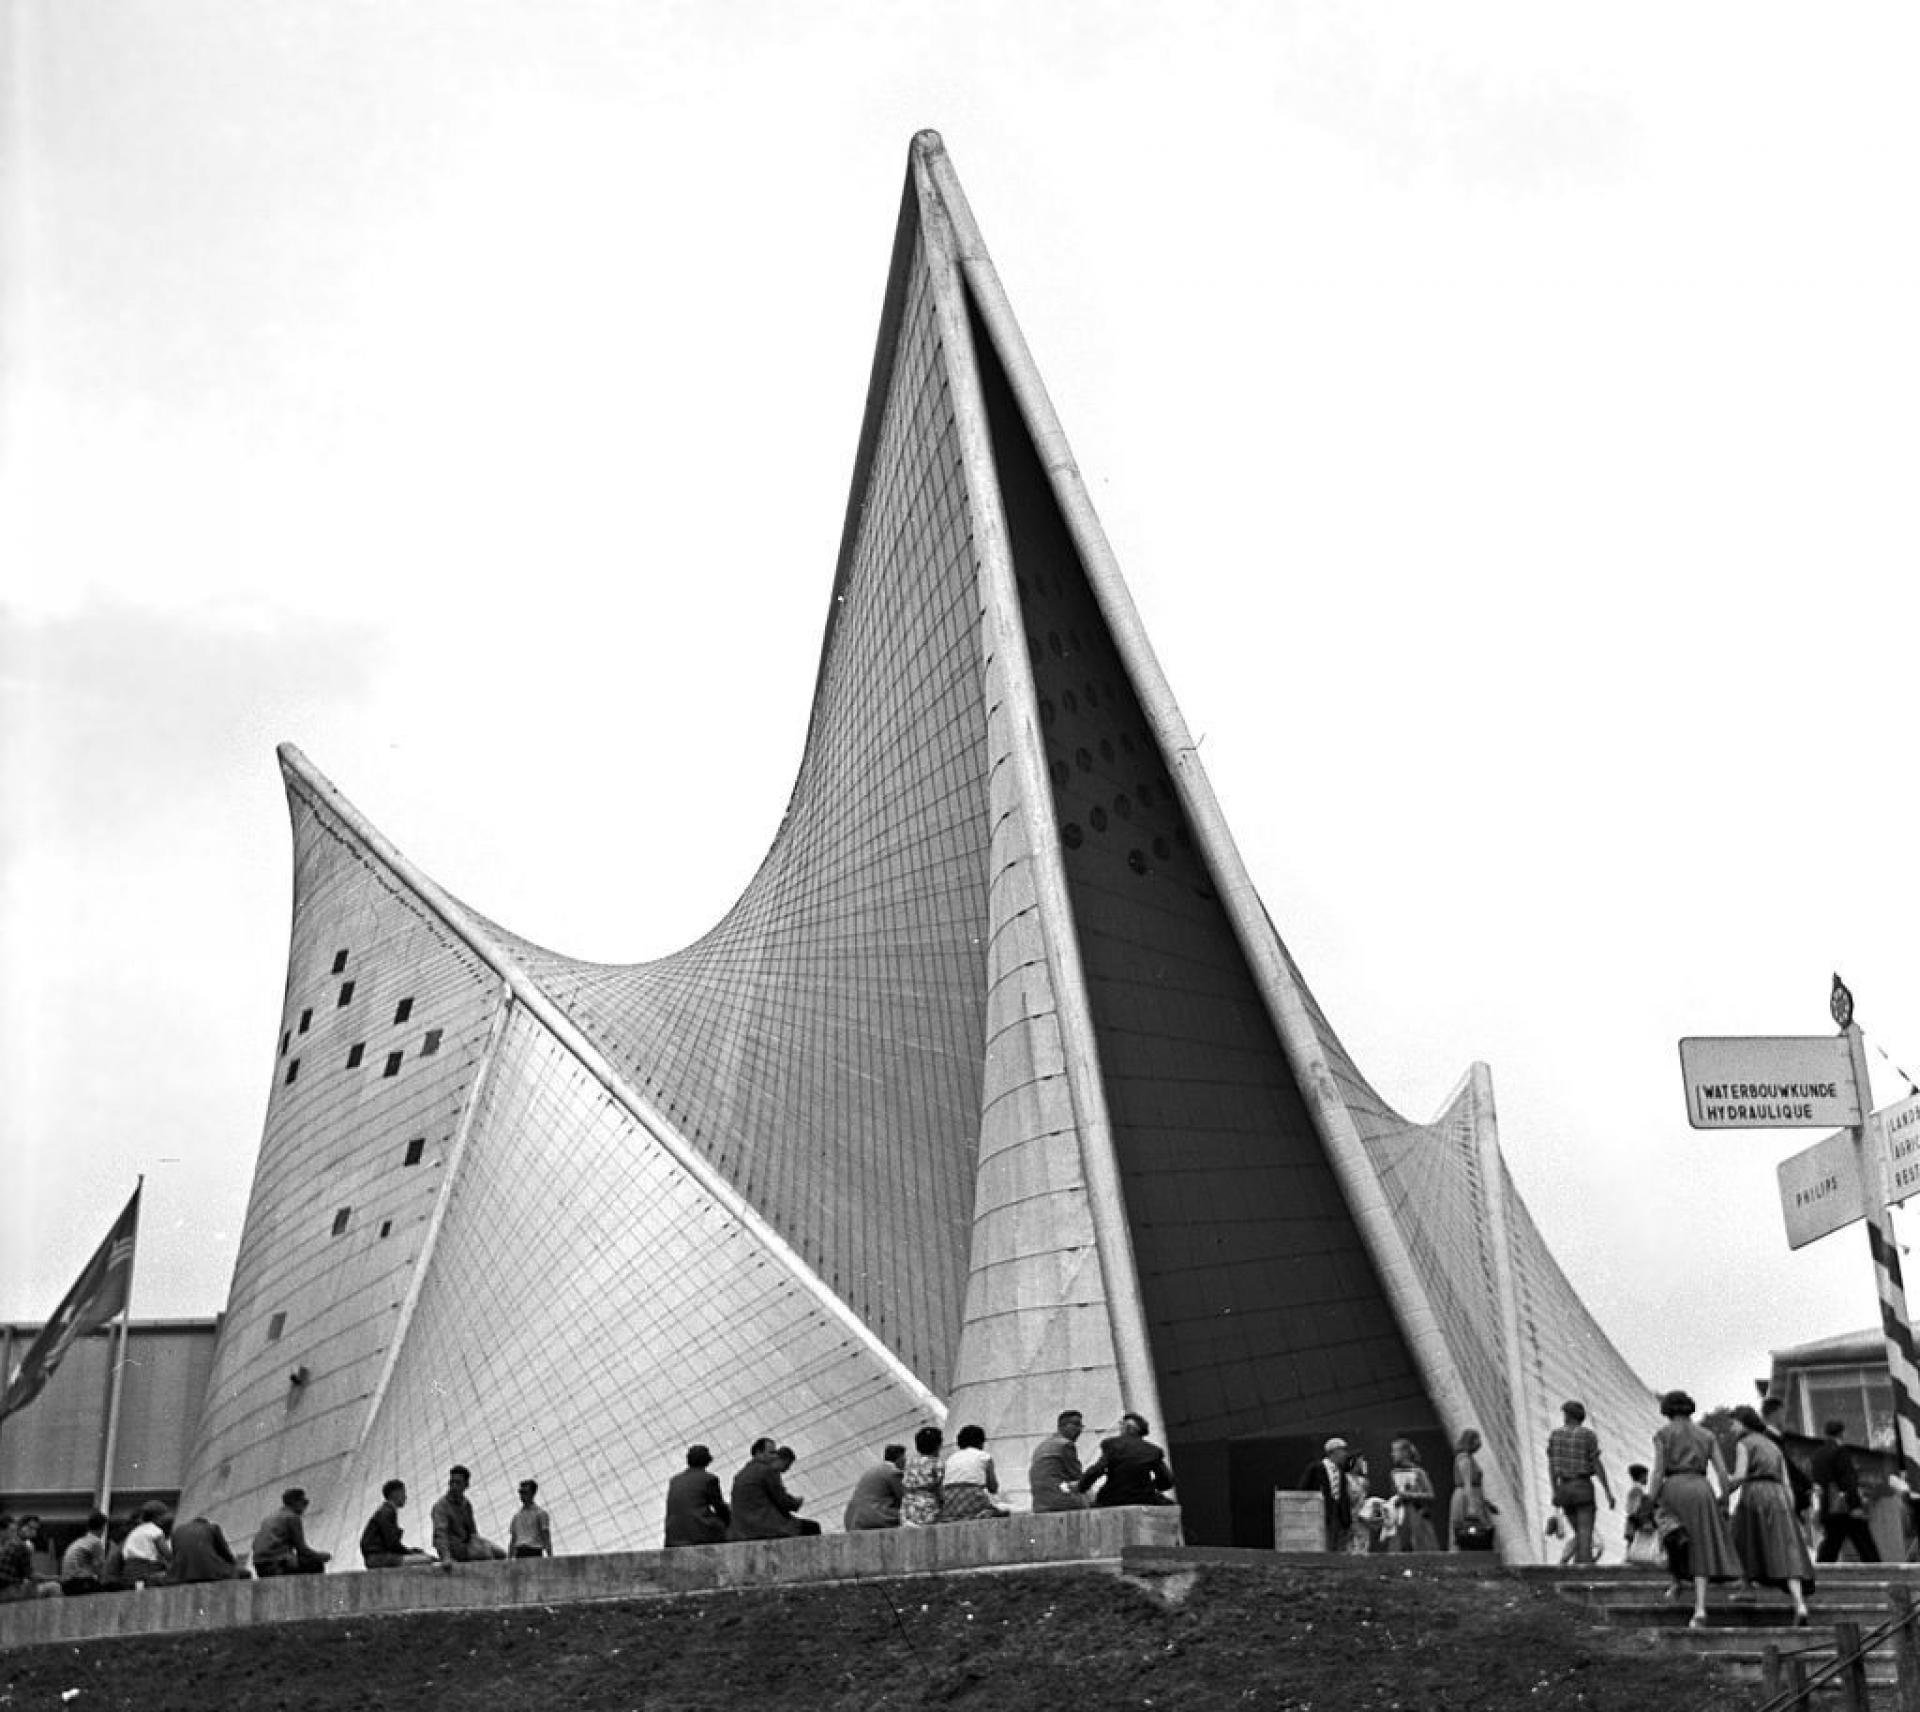 The Phillips Pavilion in Brussels Expo 1958. | Photo © Wouter Hagens